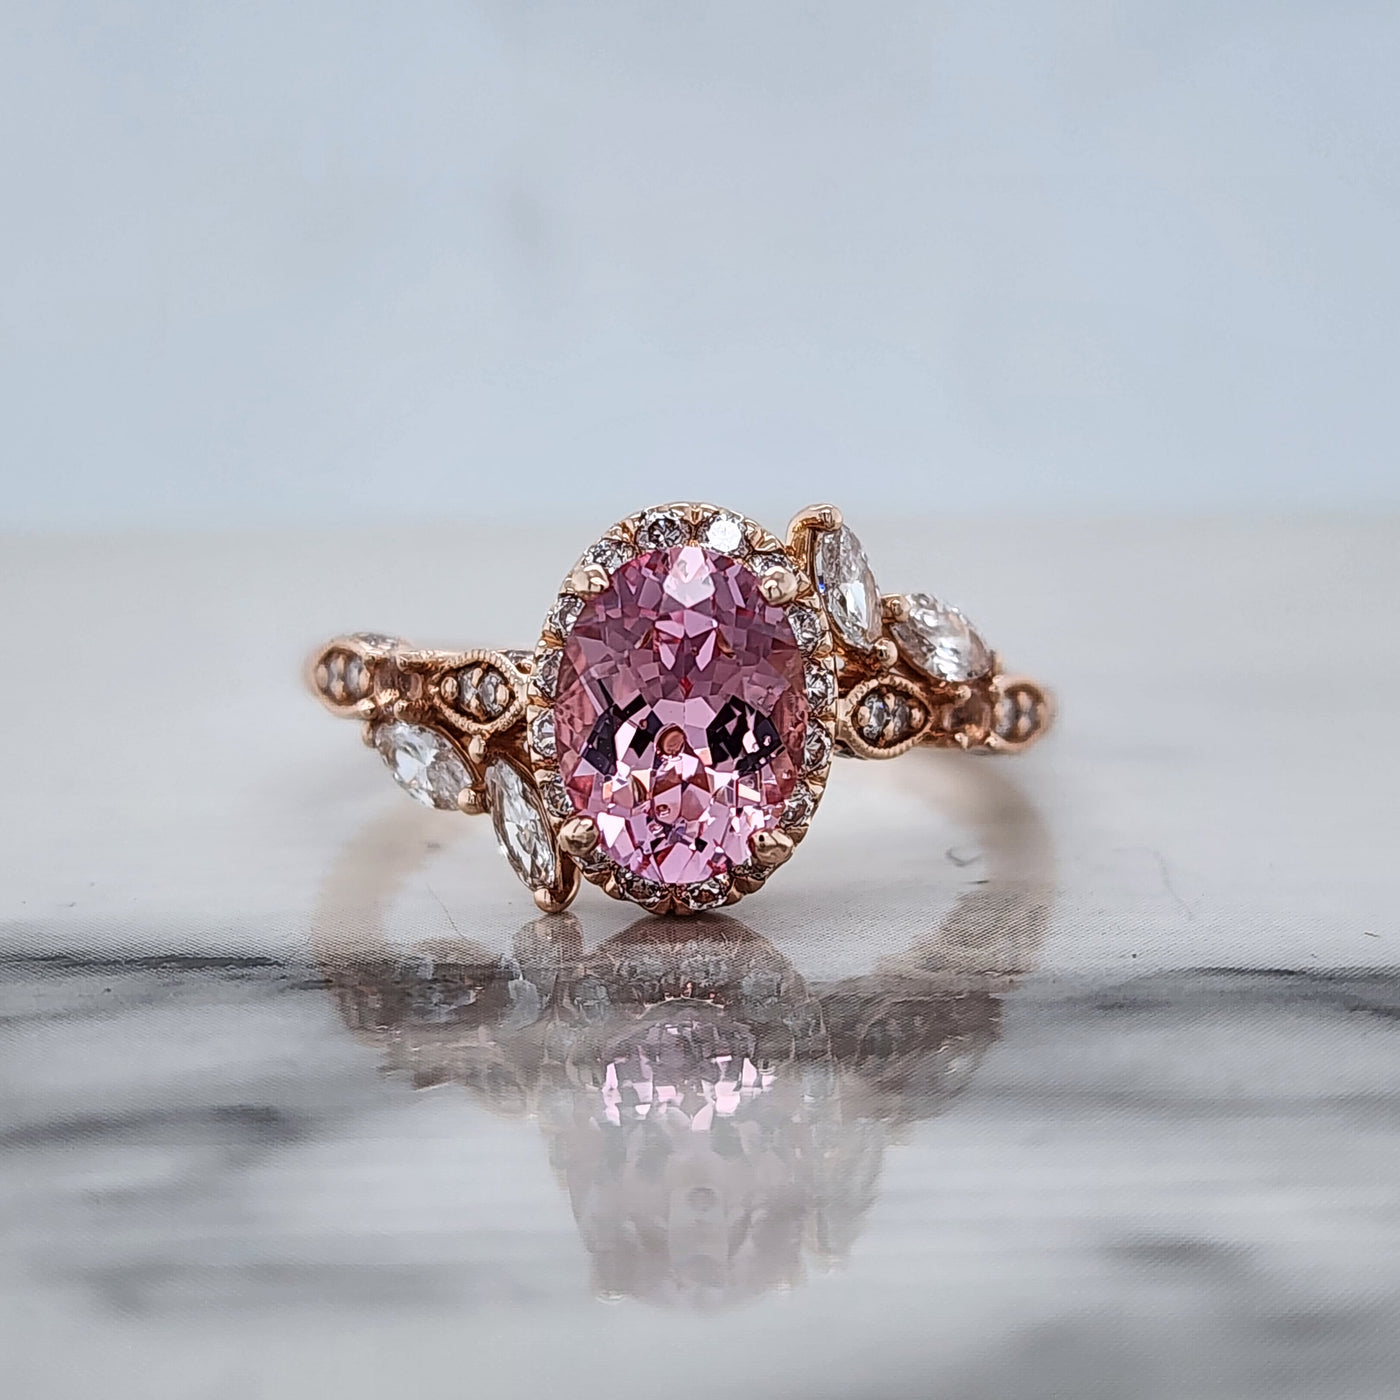 Custom Rose Gold Engagement Ring Featuring Pink Sapphire and Diamond Accents